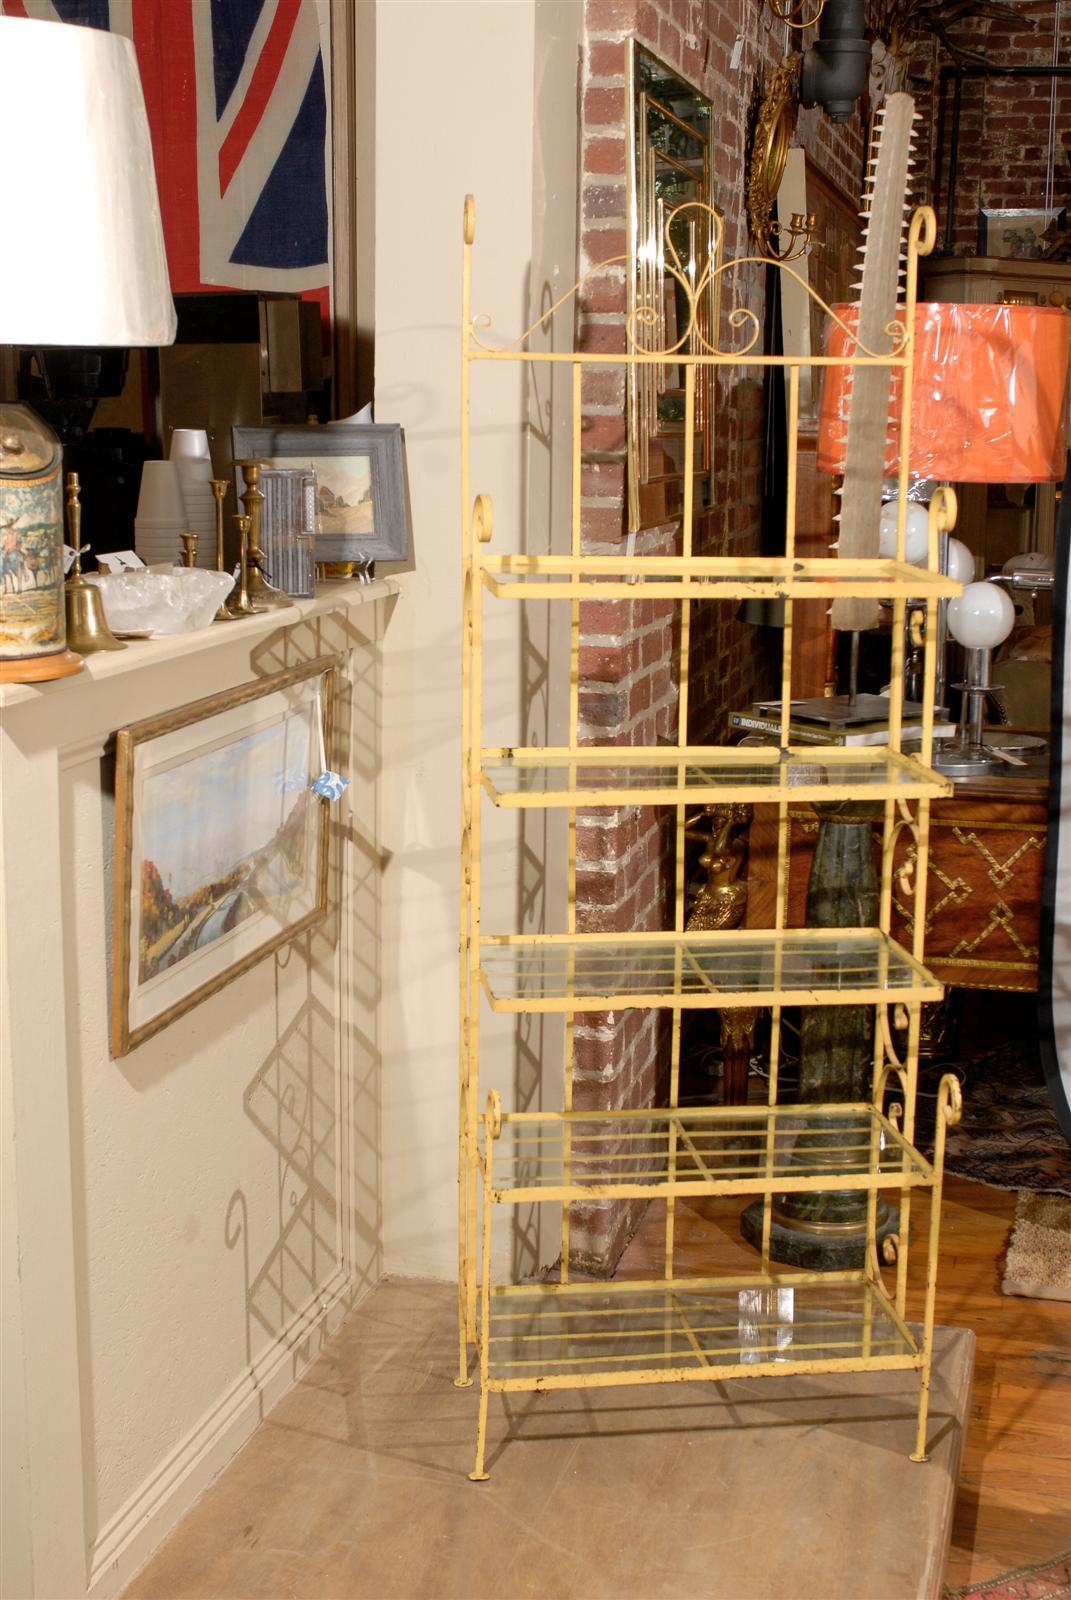 Petite midcentury baker's rack having scrolling ironwork in the original yellow paint and supporting five glass shelves.